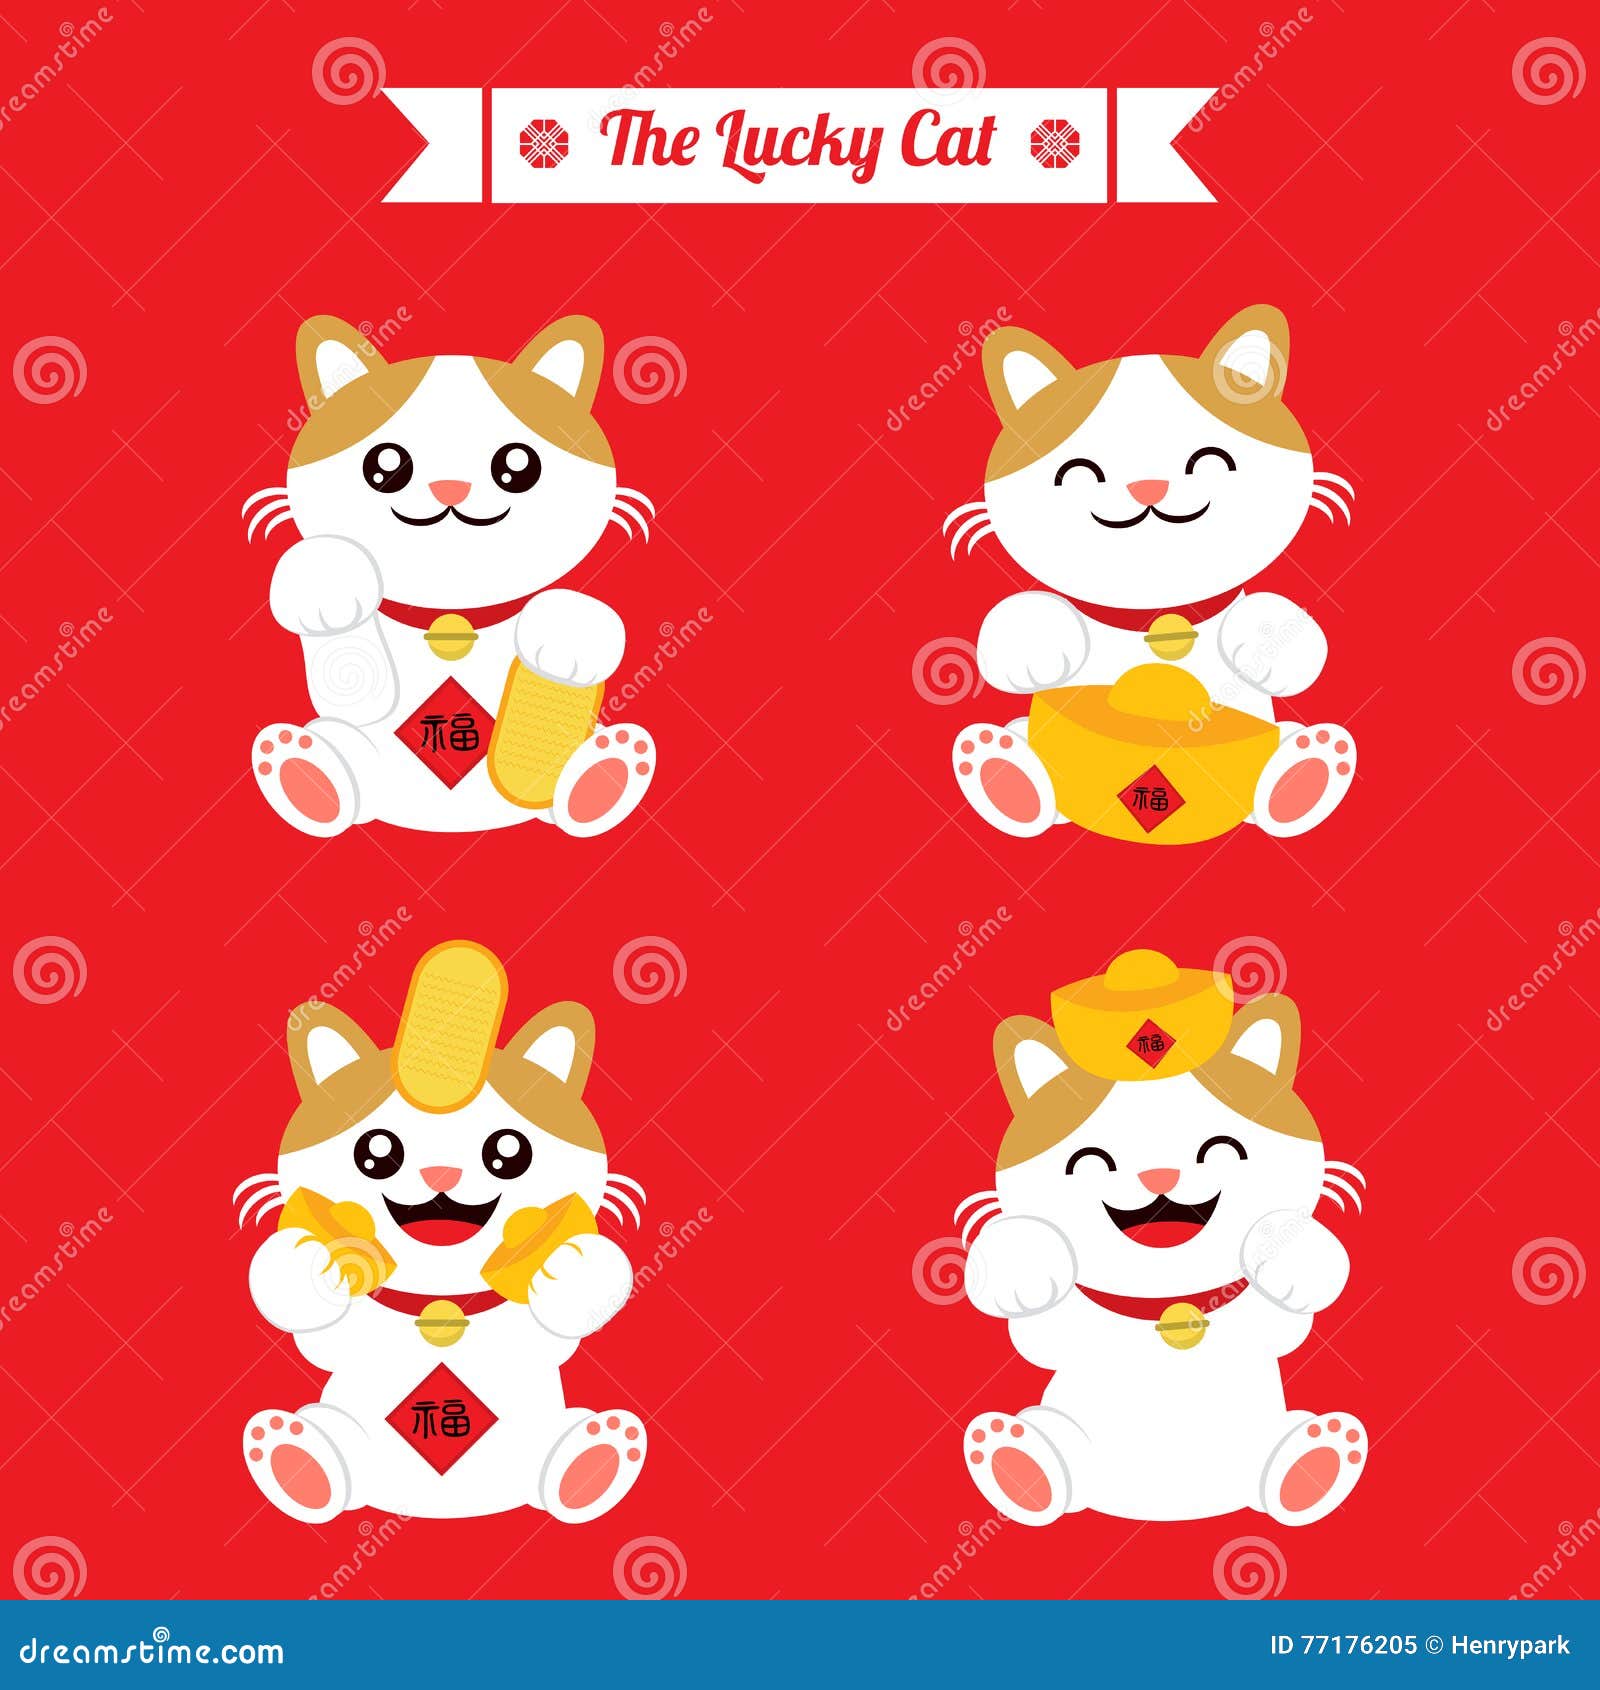 The lucky cat icon stock vector. Illustration of greeting - 77176205